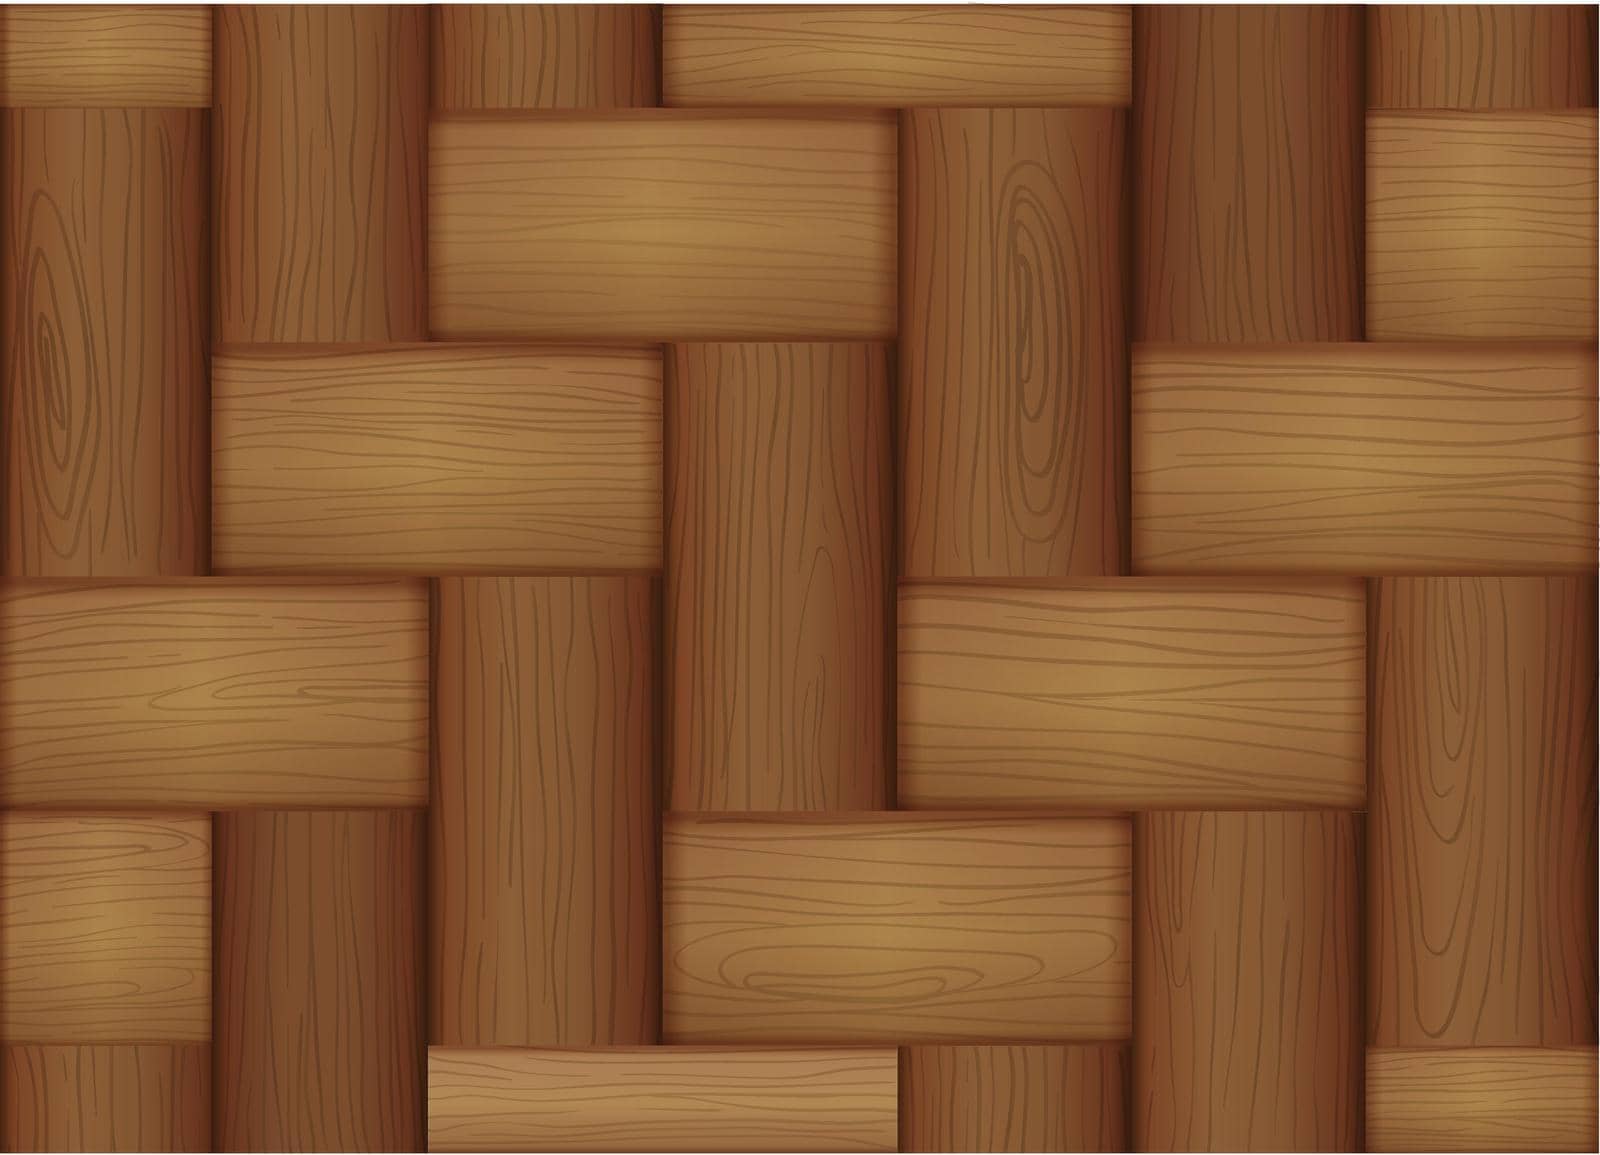 Illustration of a topview of a wooden tile